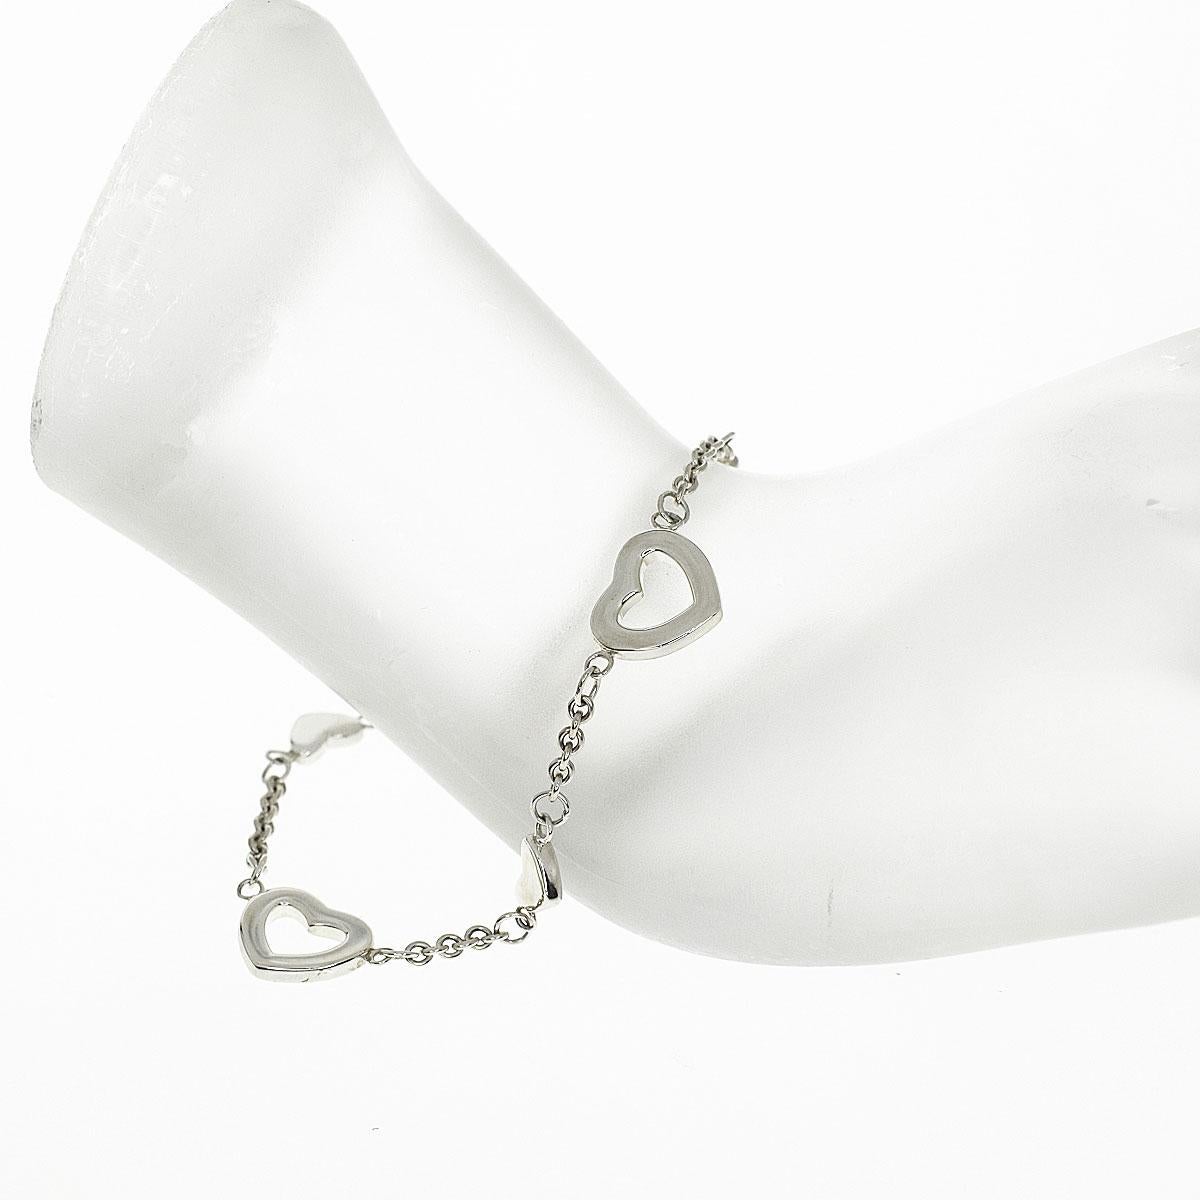 Brand:TIFFANY&Co. 
Name:Heart Link Bracelet
Material :925 SV Silver
Comes with:Tiffany Box
Length:17cm / 6.69